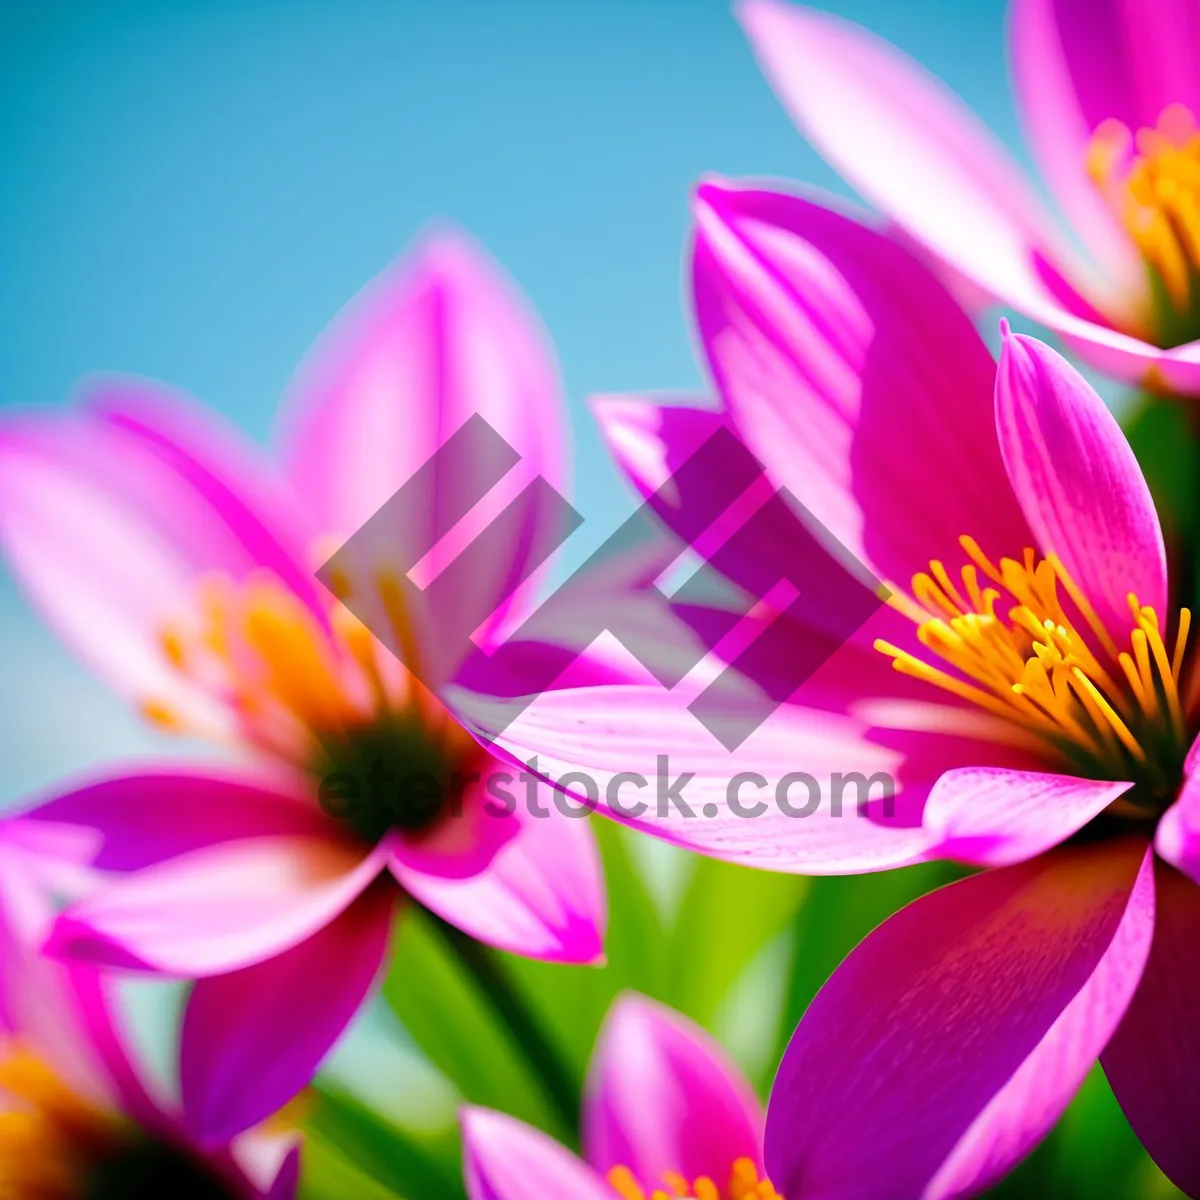 Picture of Vibrant Lotus Blossom in Full Bloom